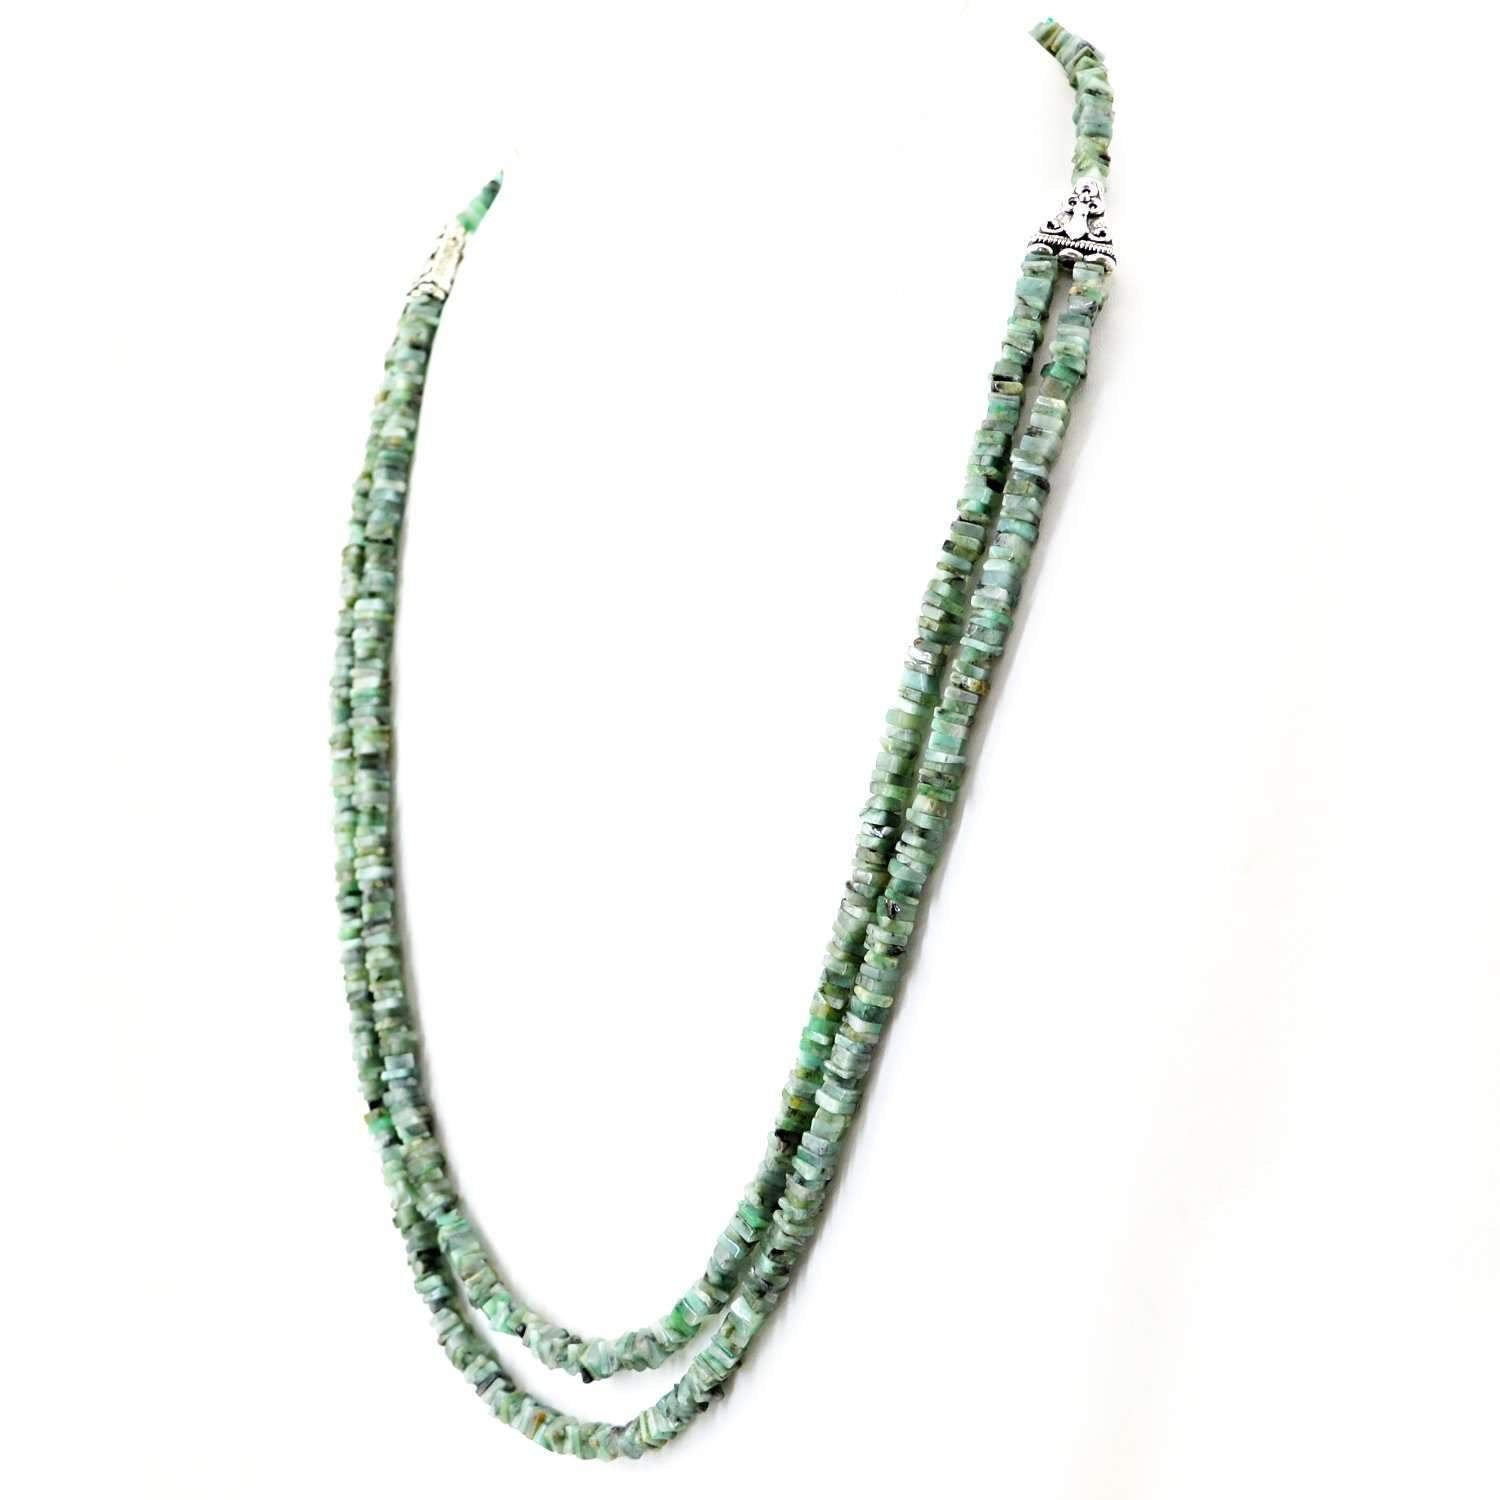 gemsmore:Untreated Emerald Necklace Natural 2 Strand Genuine Beads - Best Quality